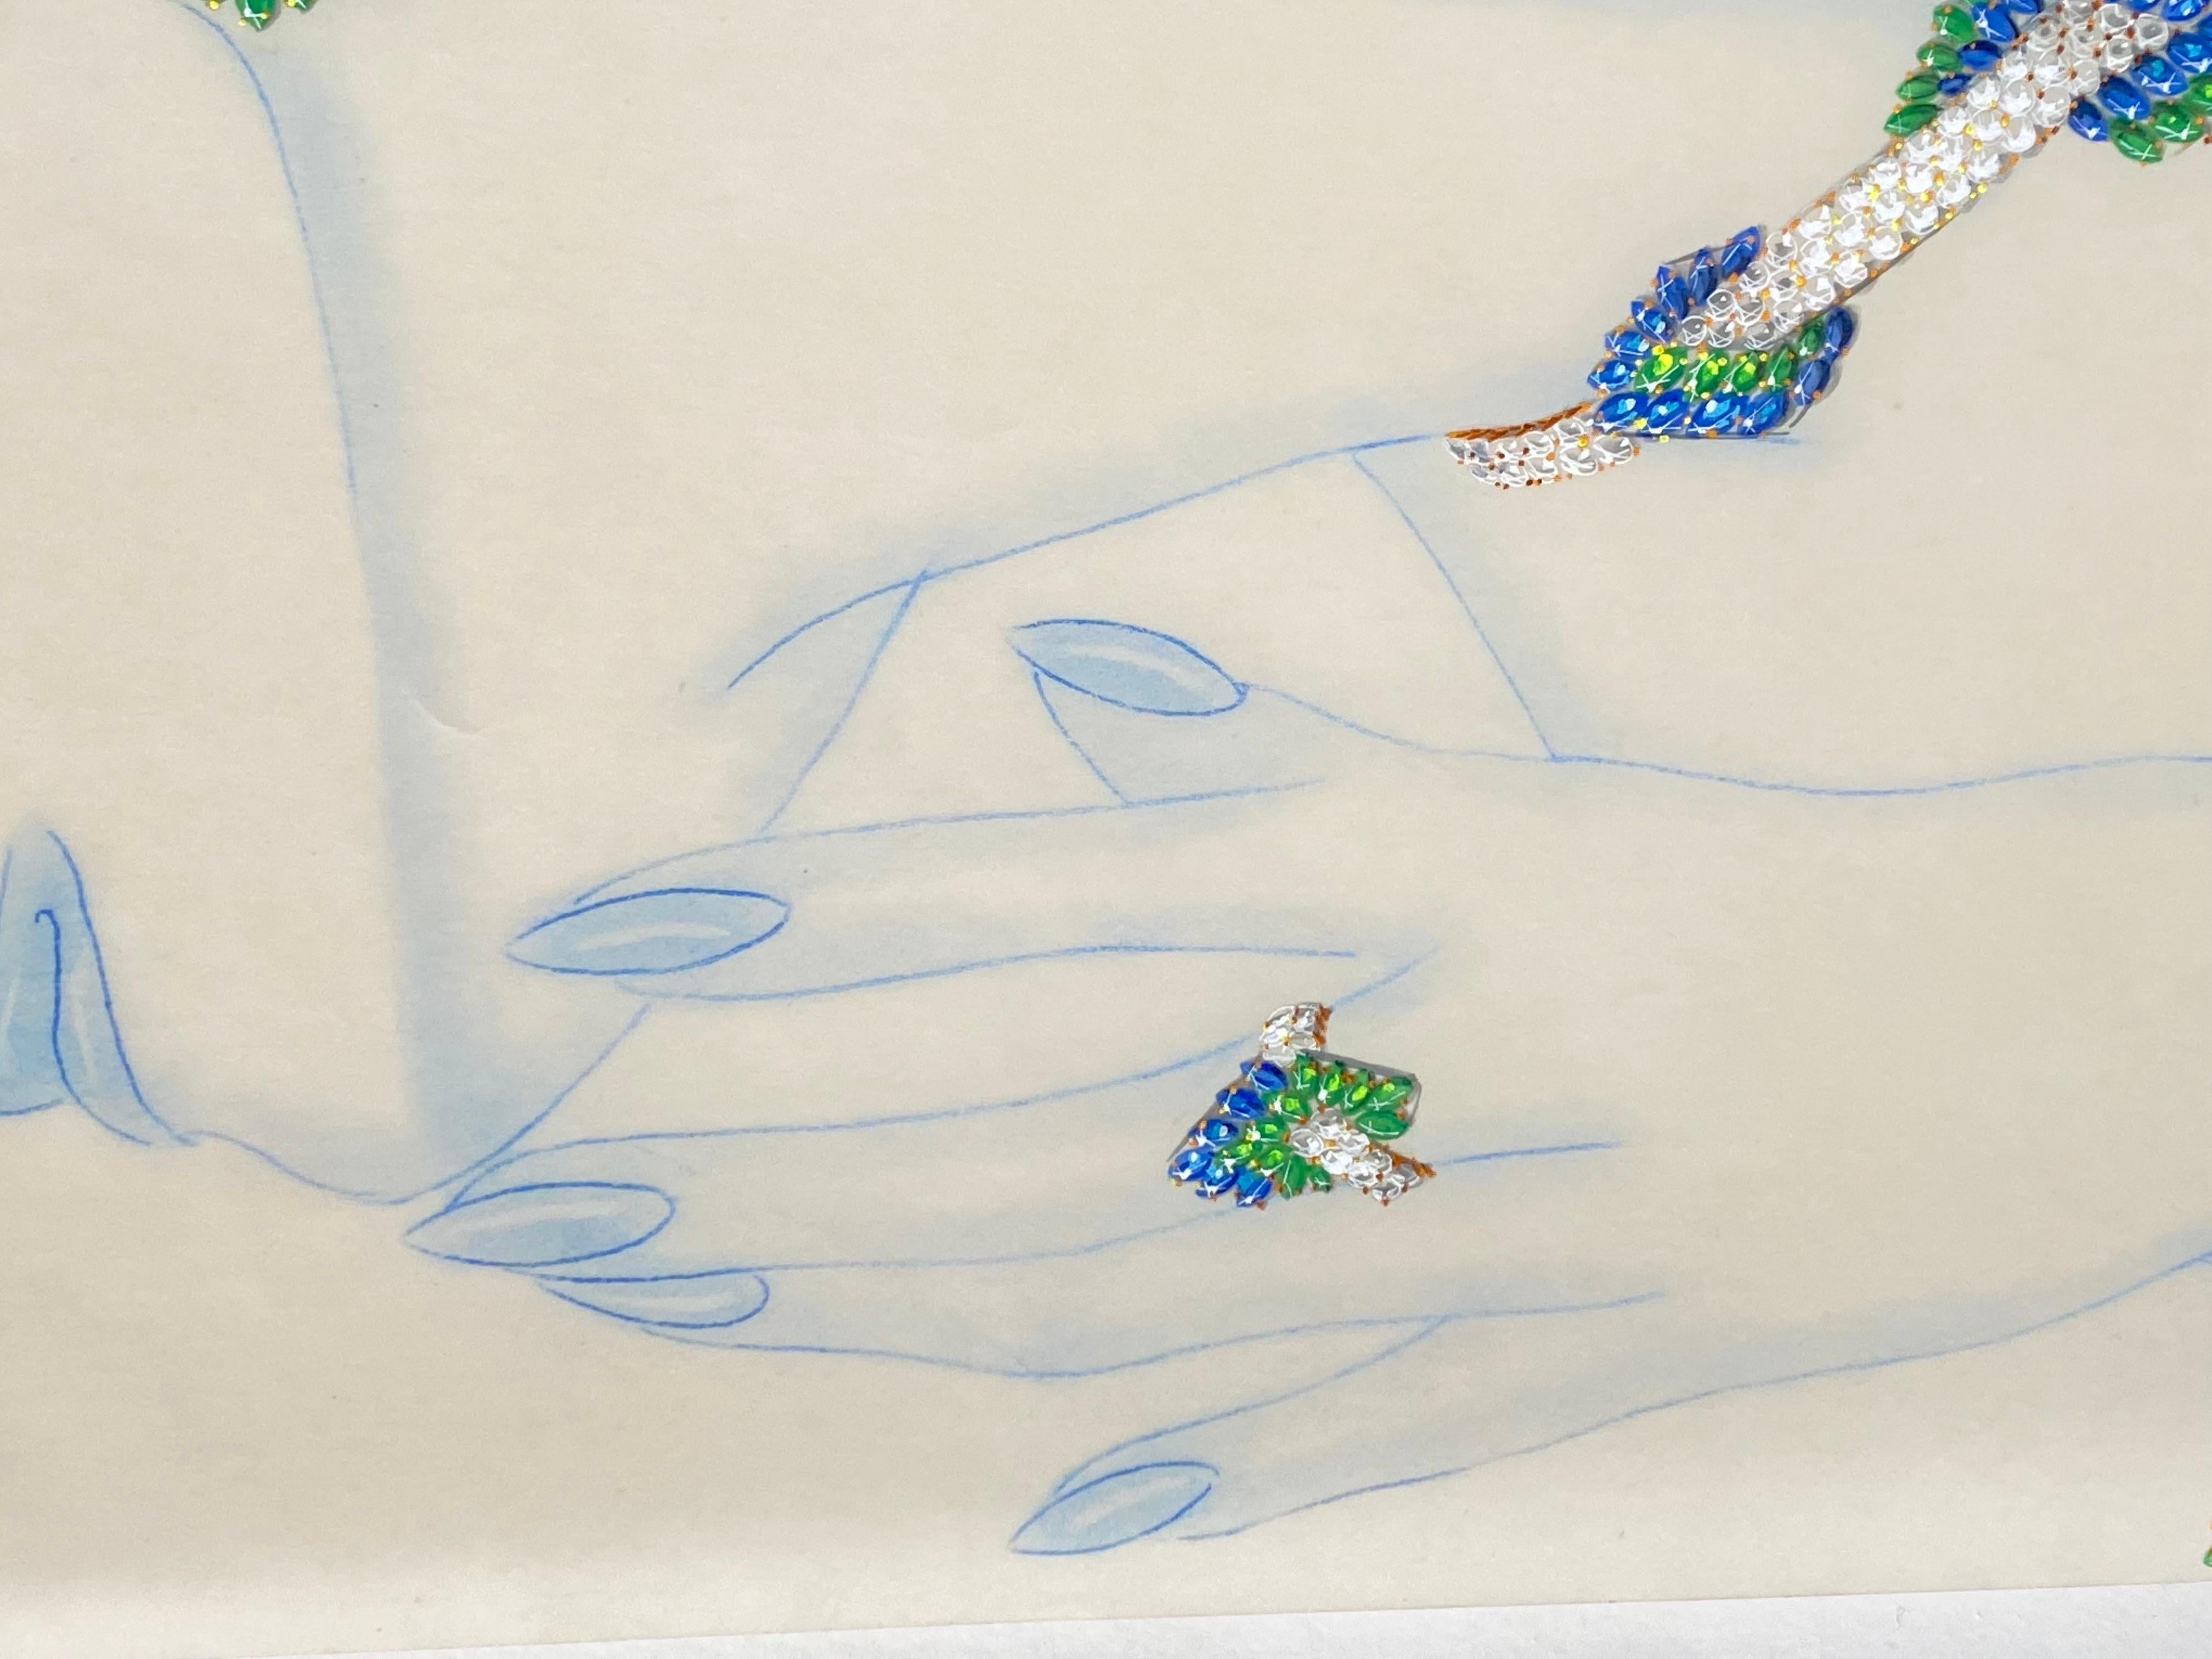 Sketch for a jewel set - necklace and earrings - Van Cleef Bulgari Cartier 1985 - Photorealist Art by Philippe Deloison